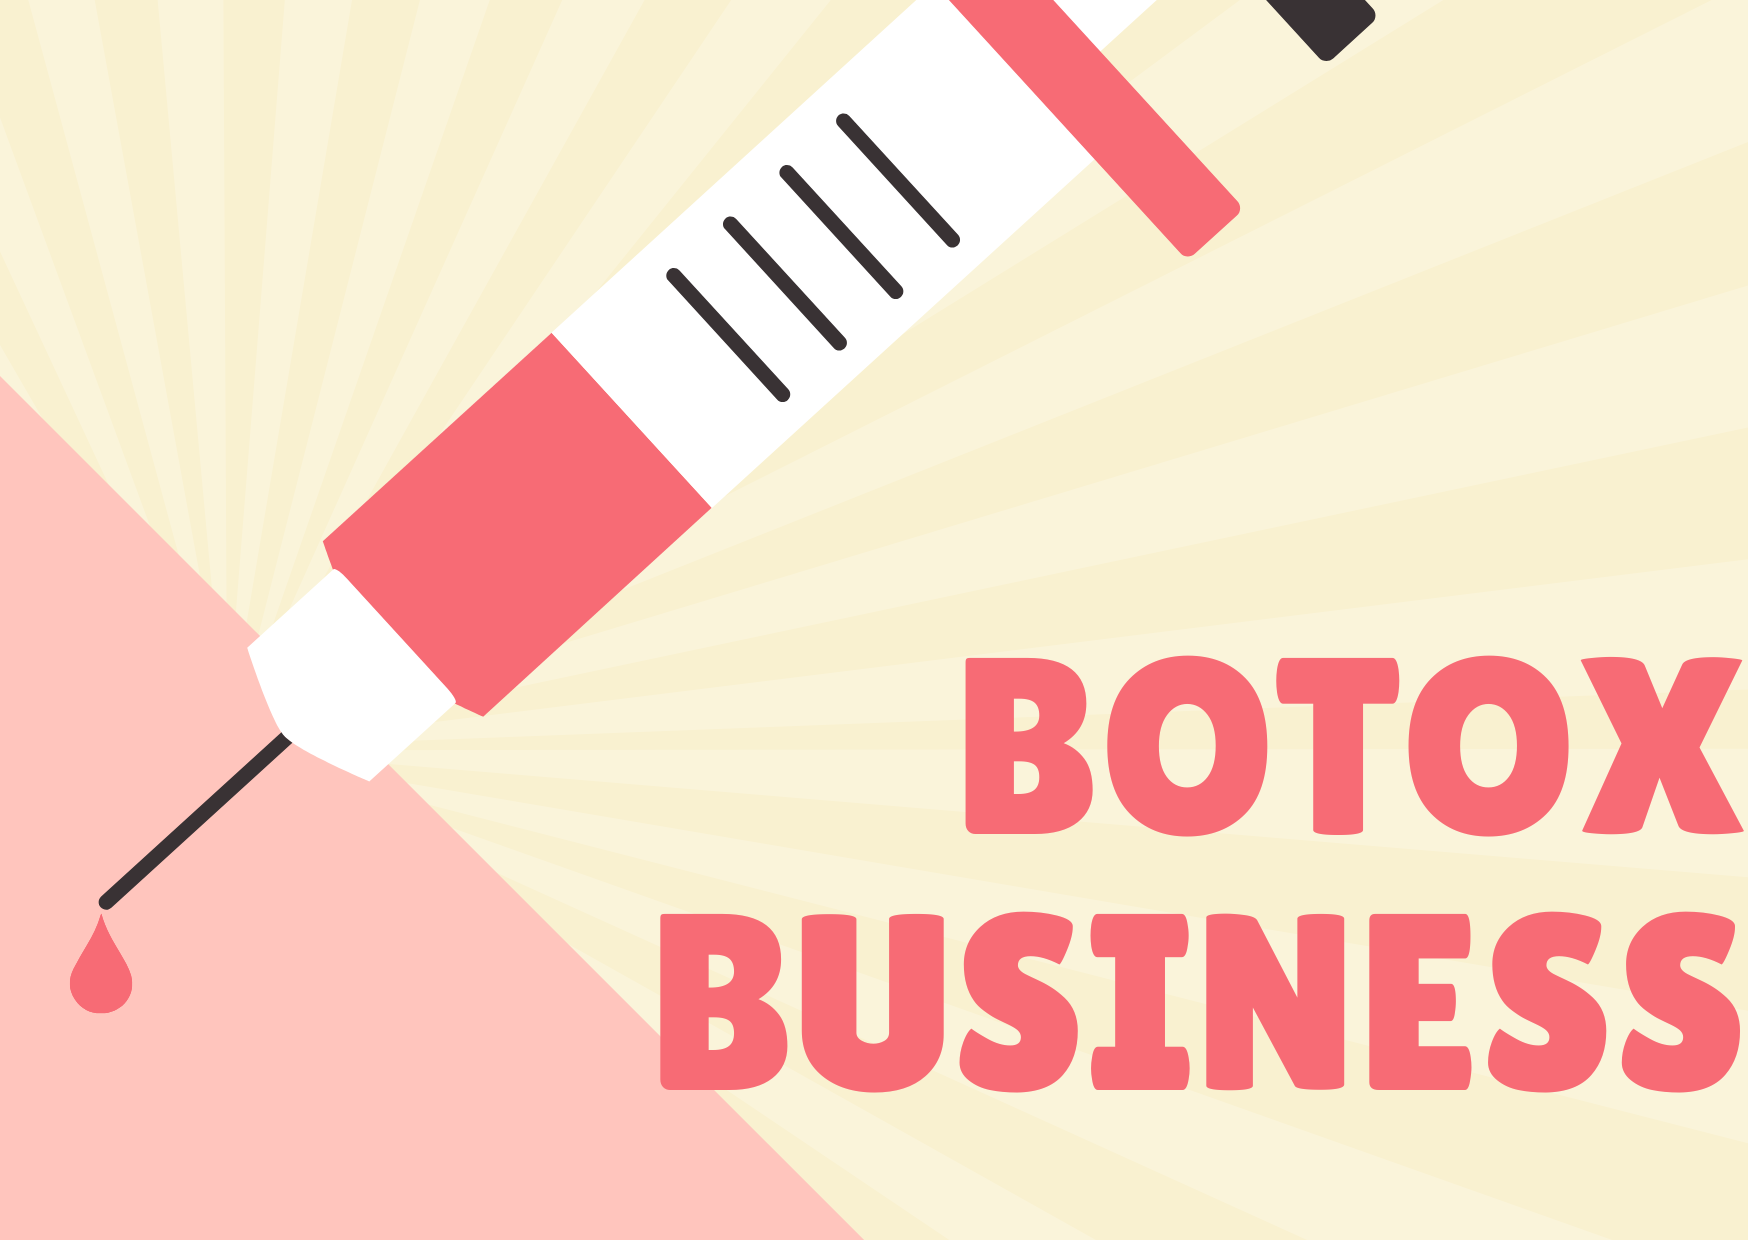 How to start a botox business, impage created by Canva 